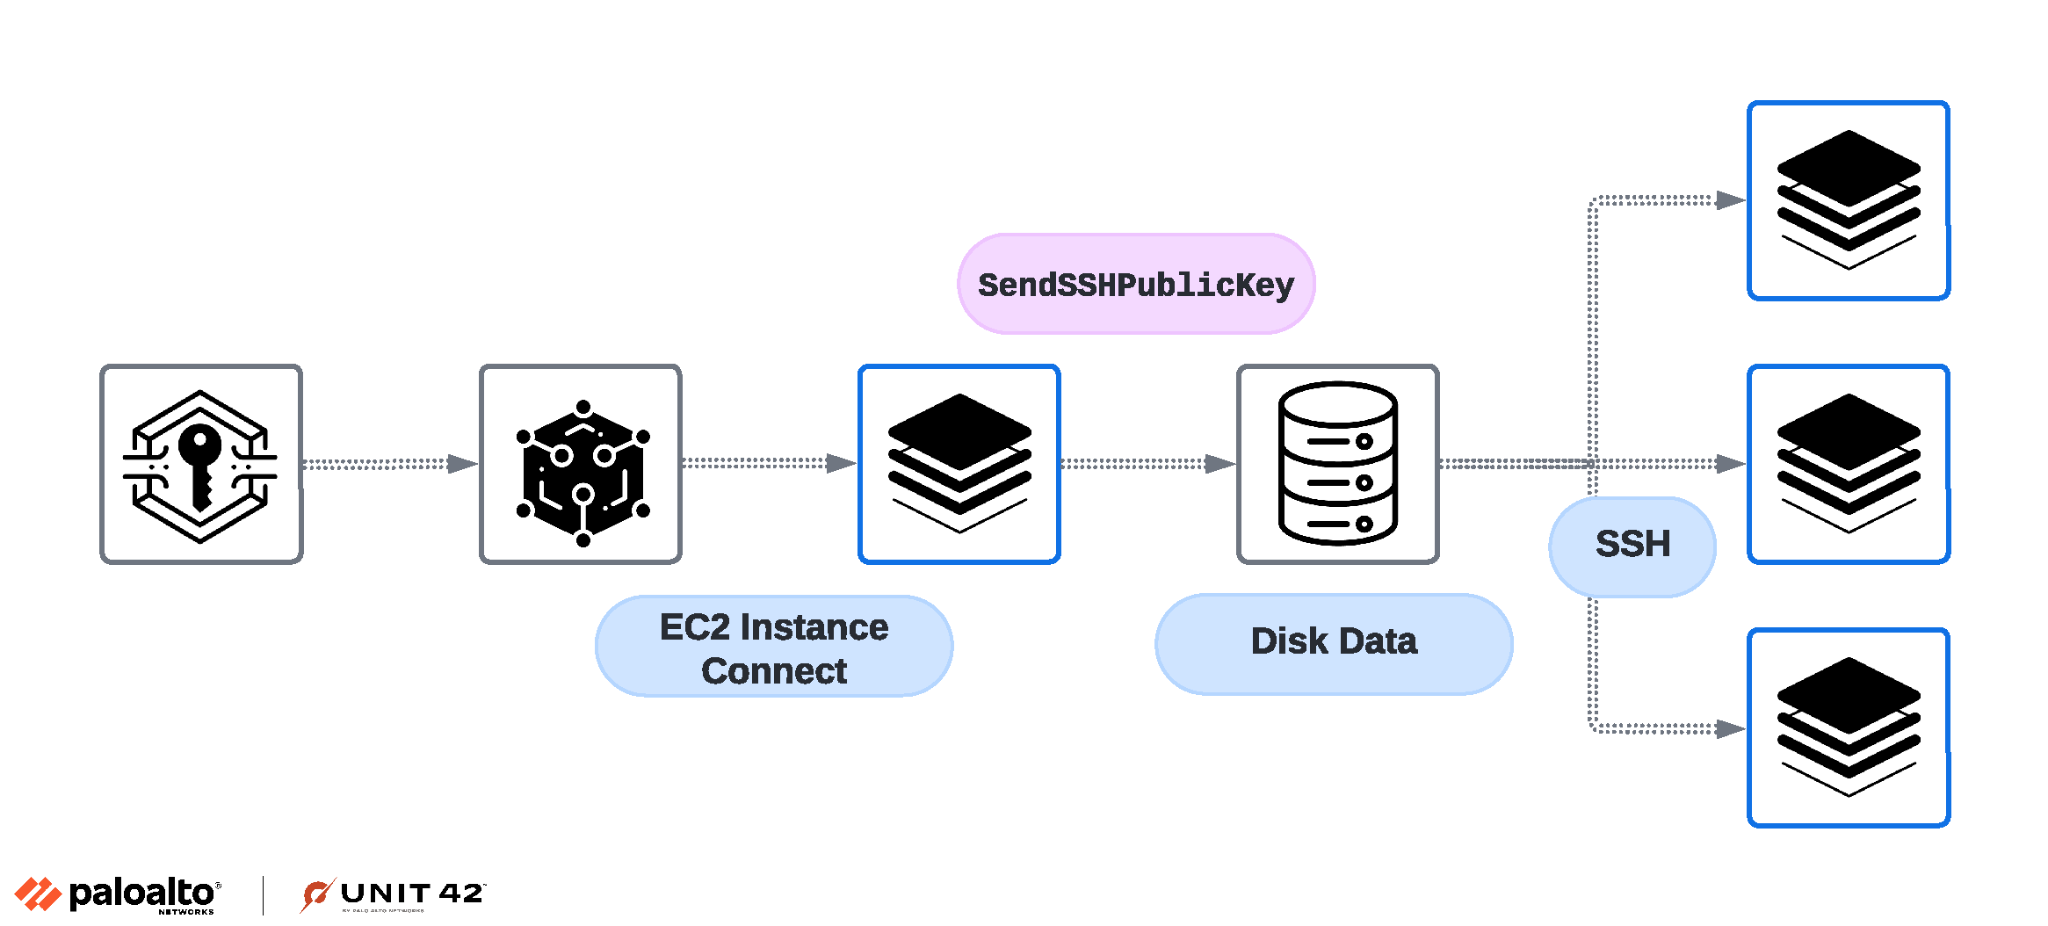 Image 4 is a tree diagram of how the EC2 Instance Connect service is used for SSH key injection. Key  data-eio=